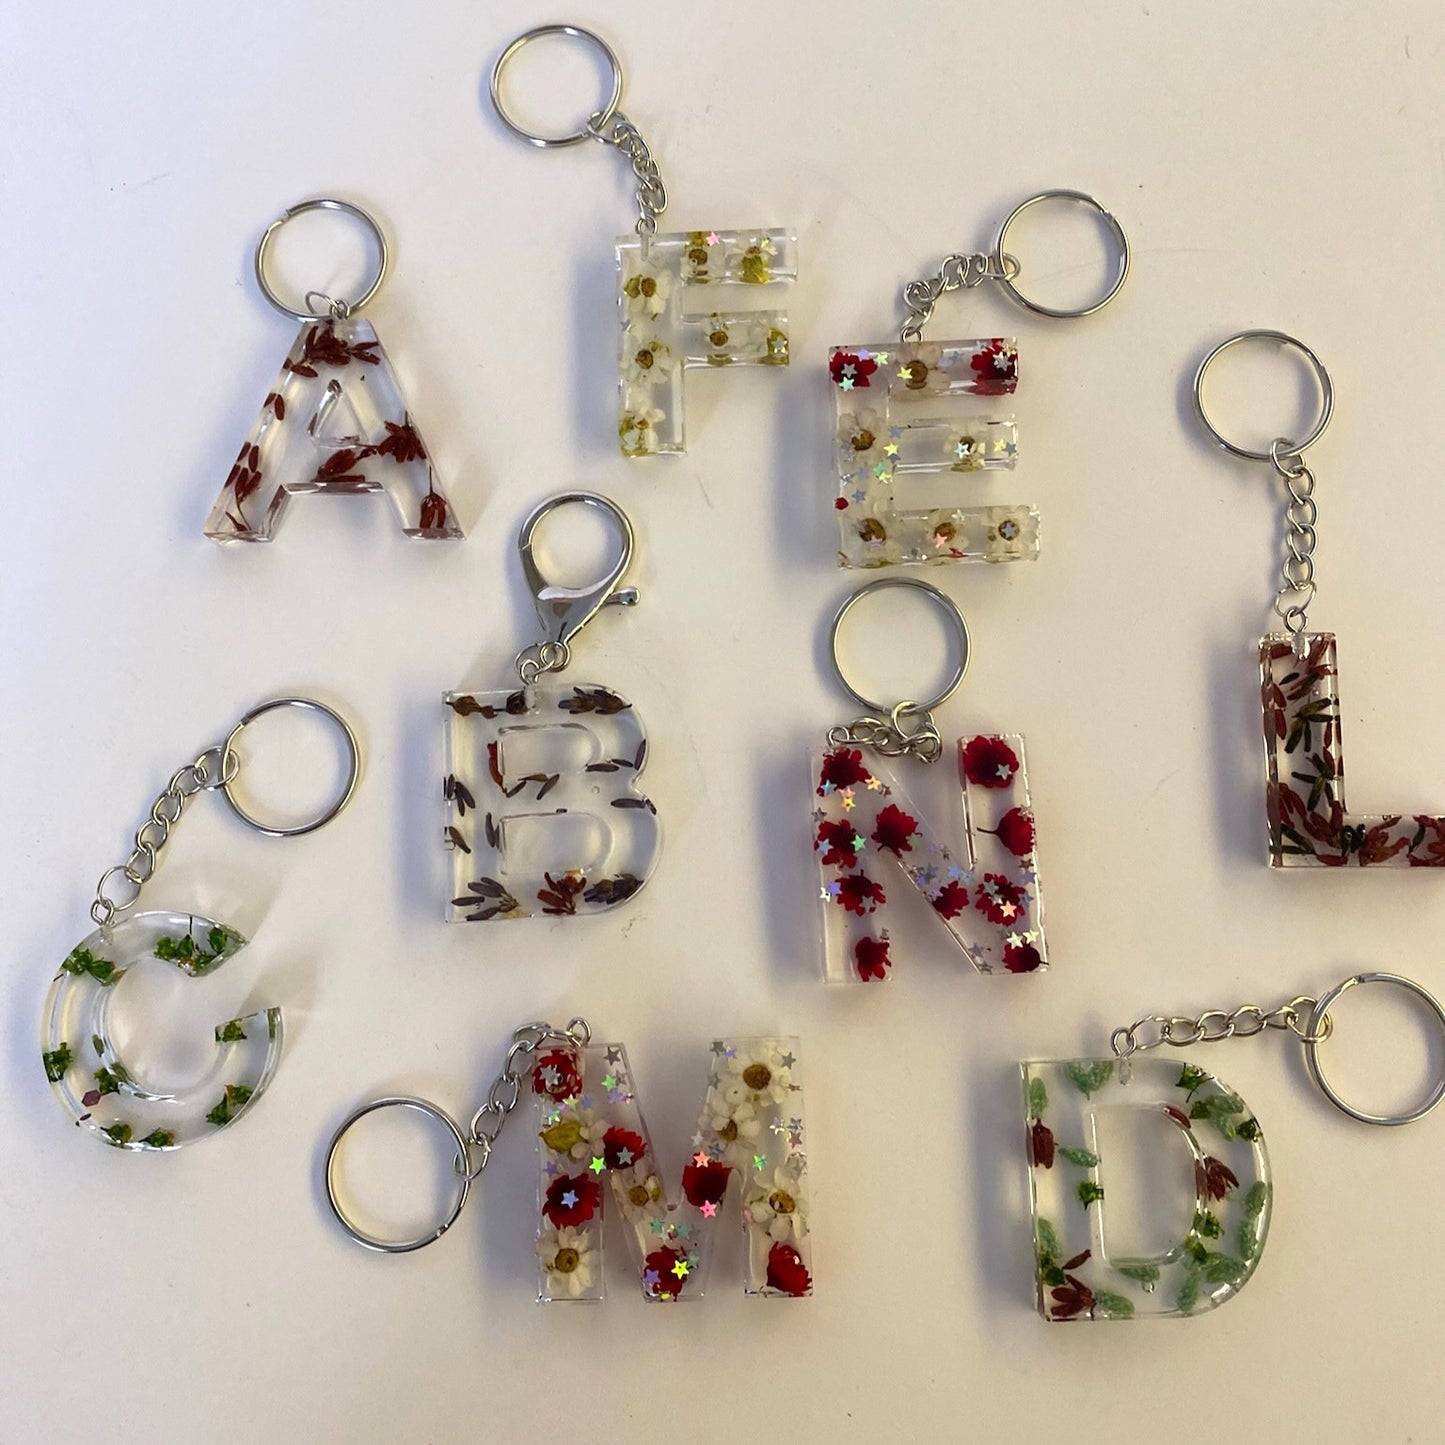 Letter keychains